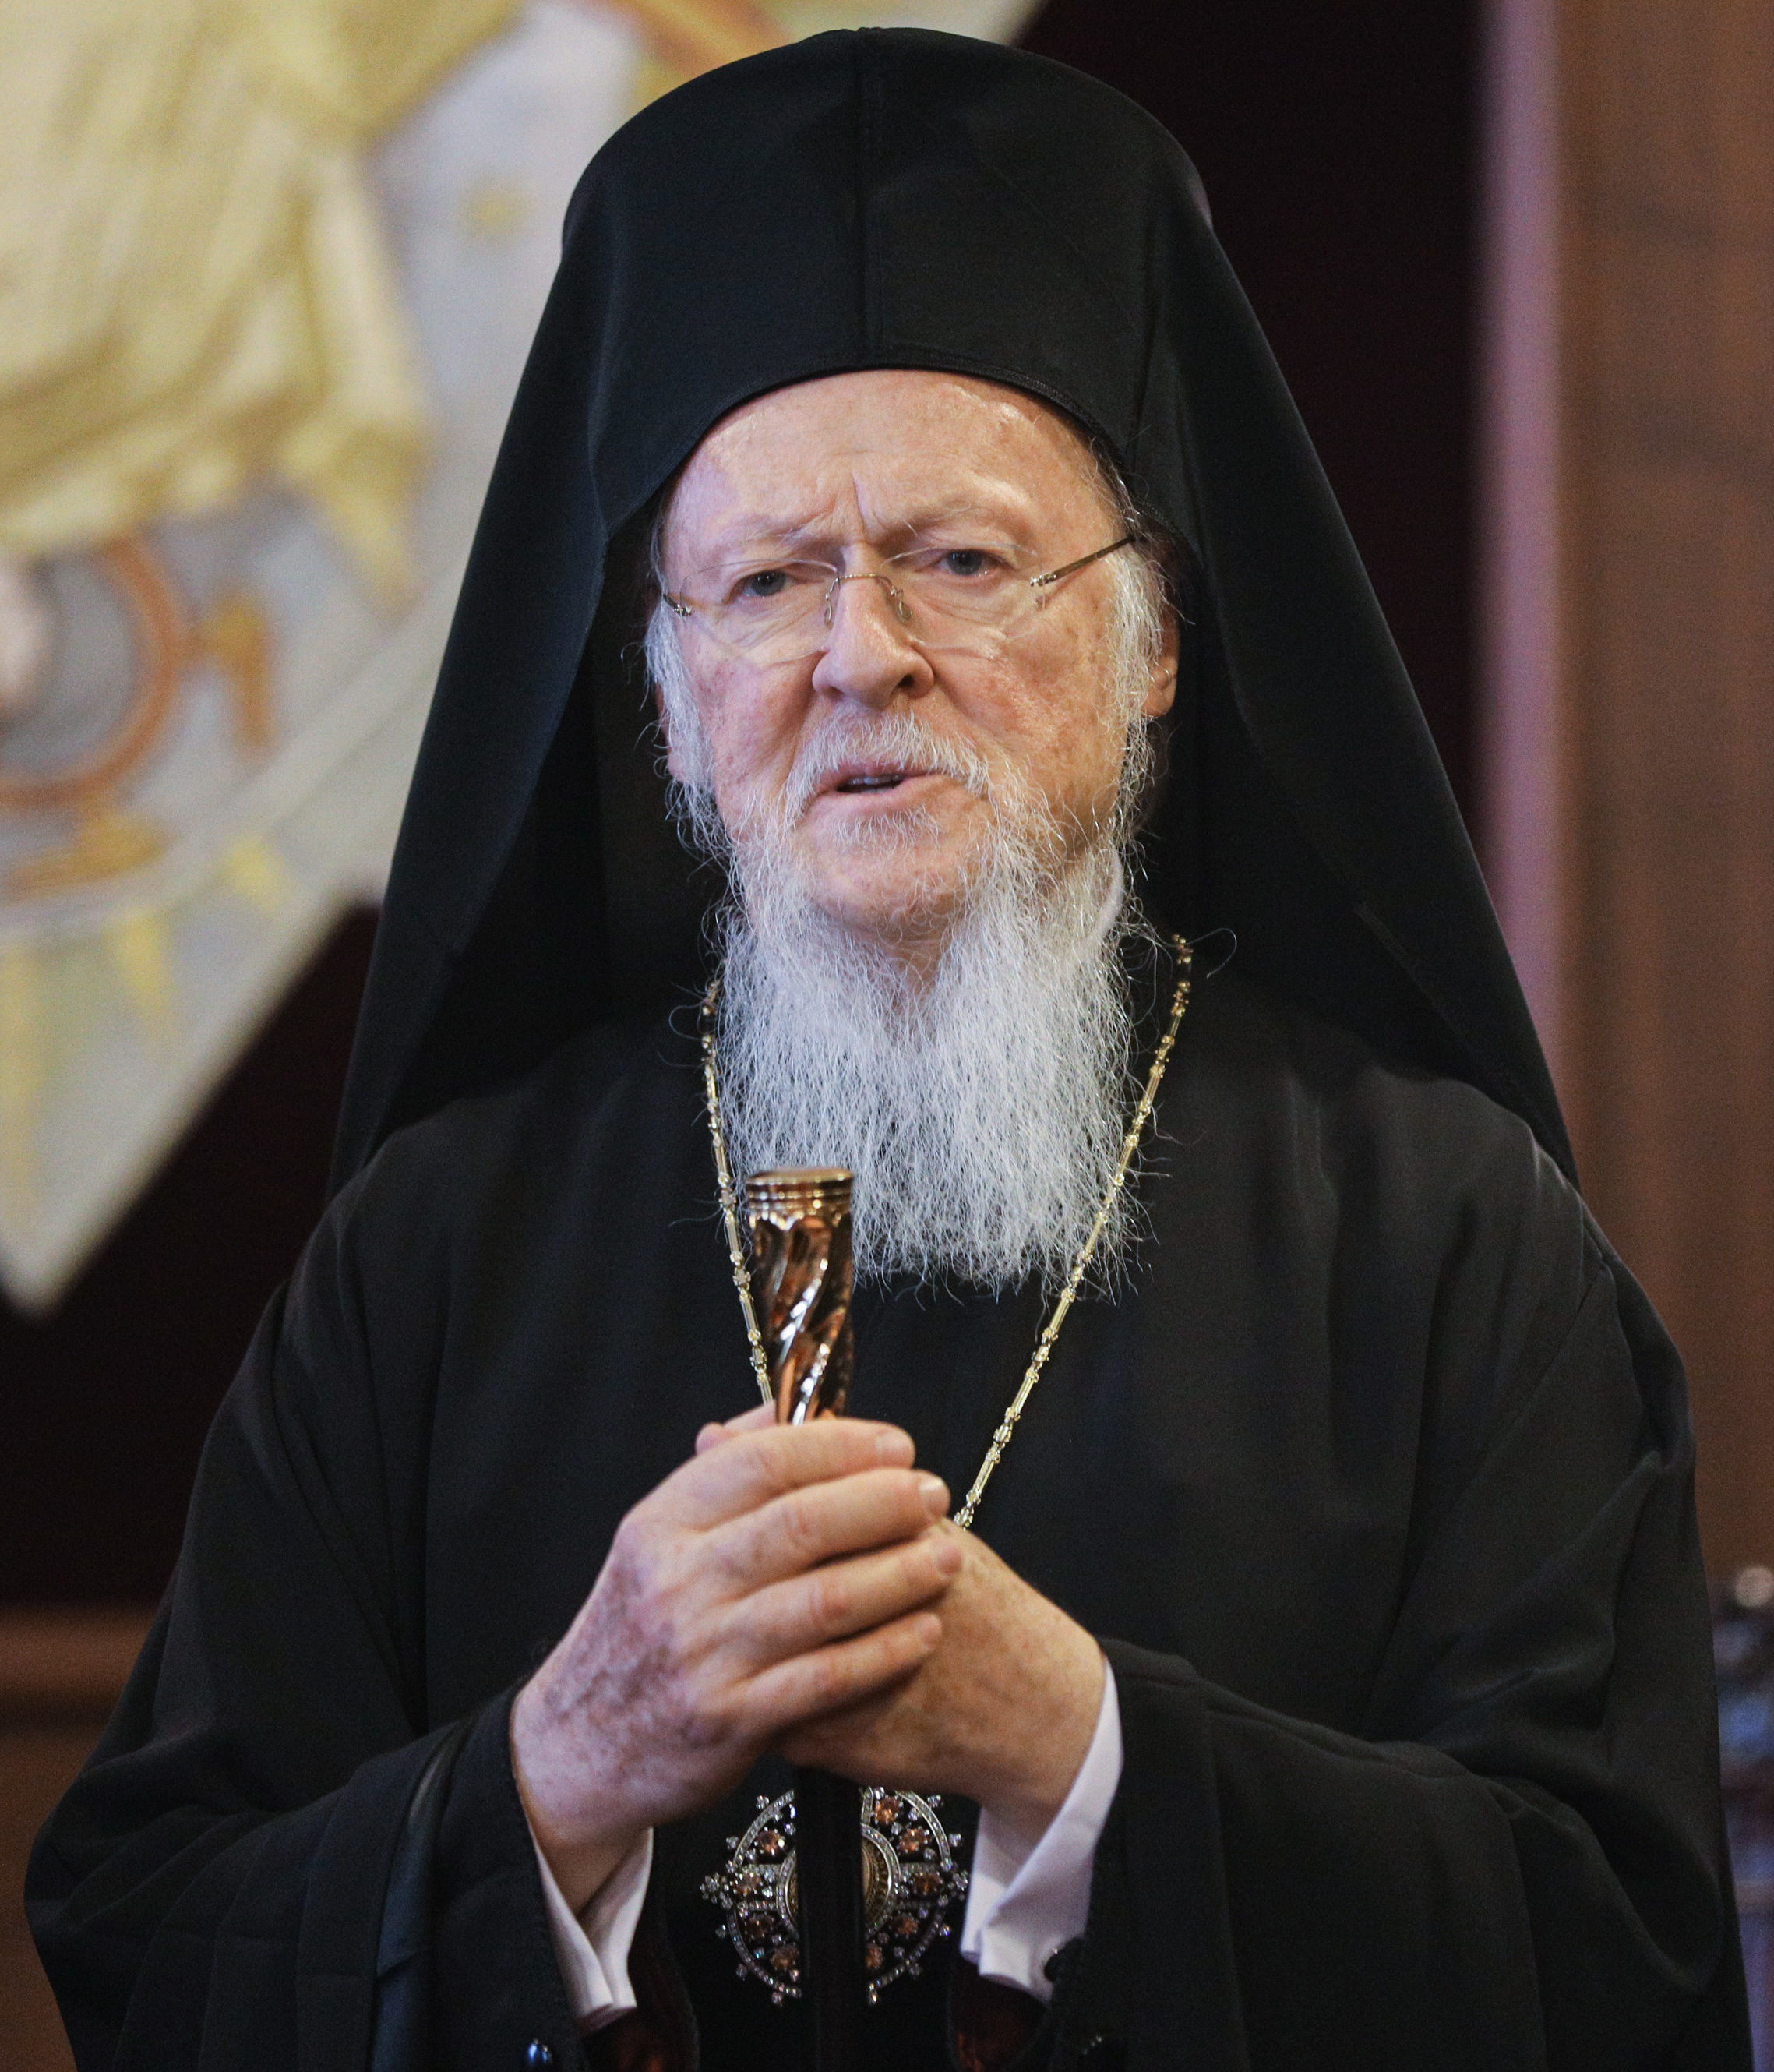 Constantinople Orthodox Church may establish presence in Lithuania to rival Moscow church